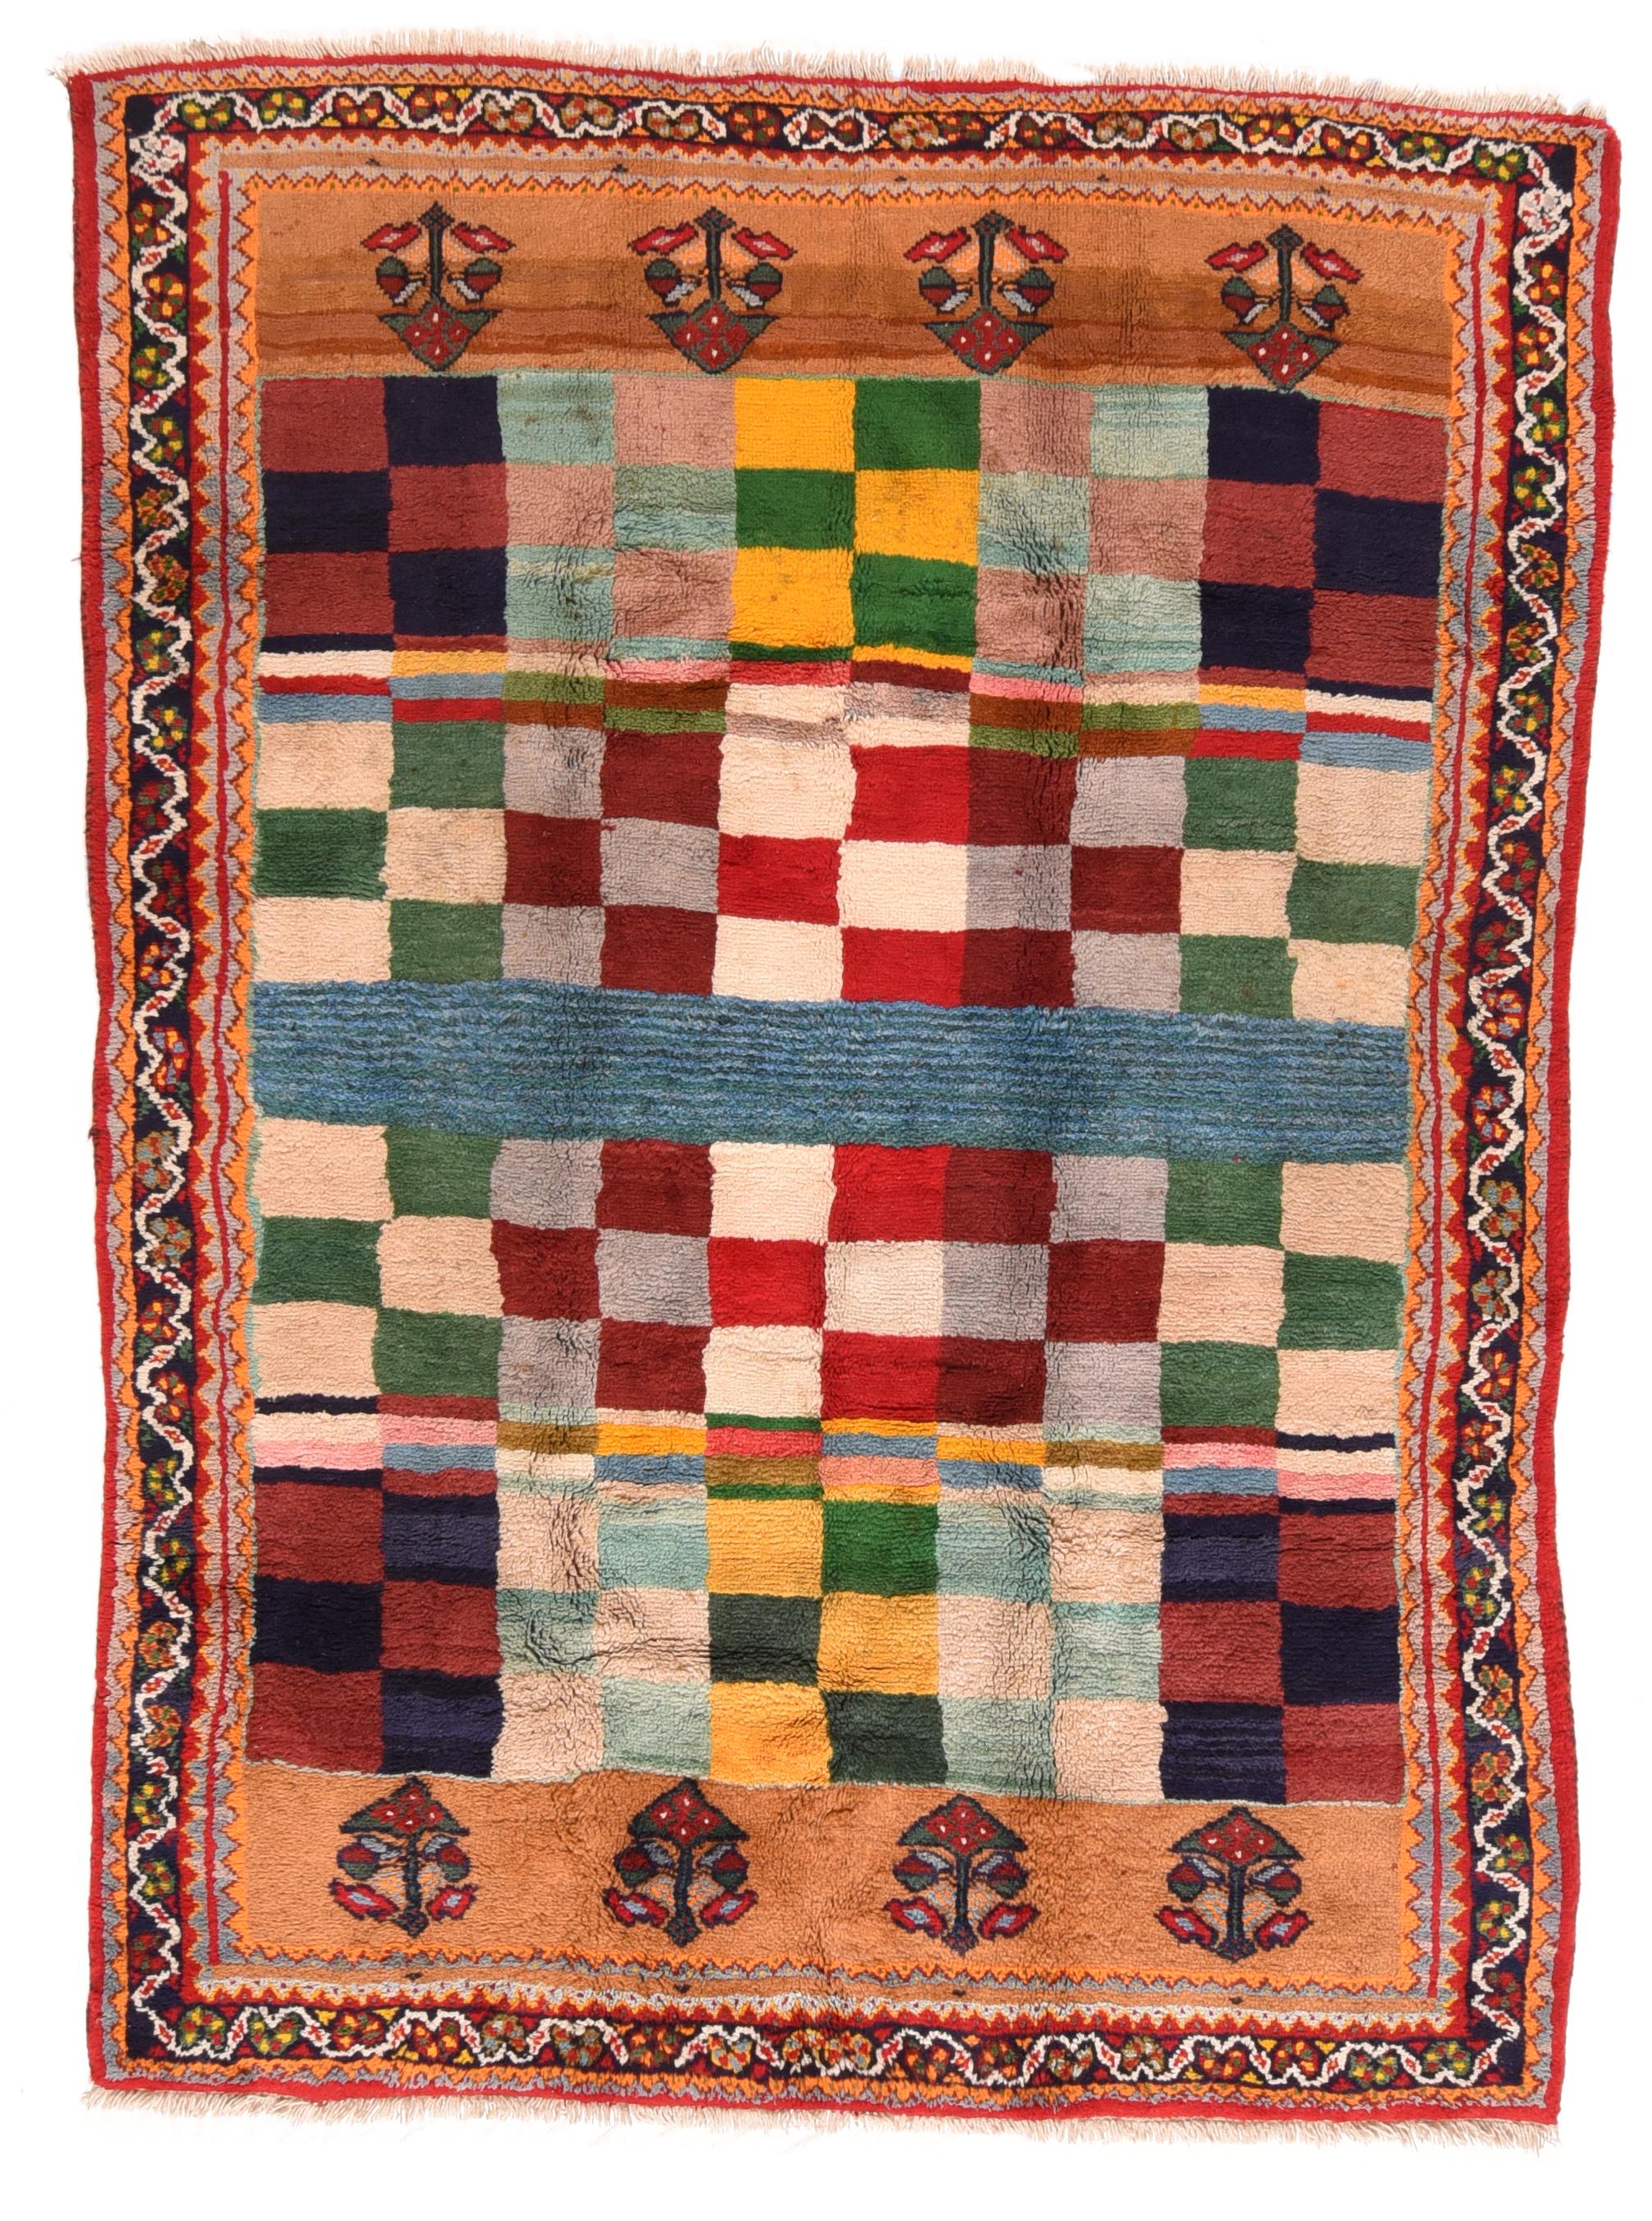 This nomadic all wool scatter shows a chessboard design of squares with a central cruciform array.Panels at each field end with four complete flowers each. Red, light blue, yellow, near black and eggshell detail tones. Ivory meander with reversing